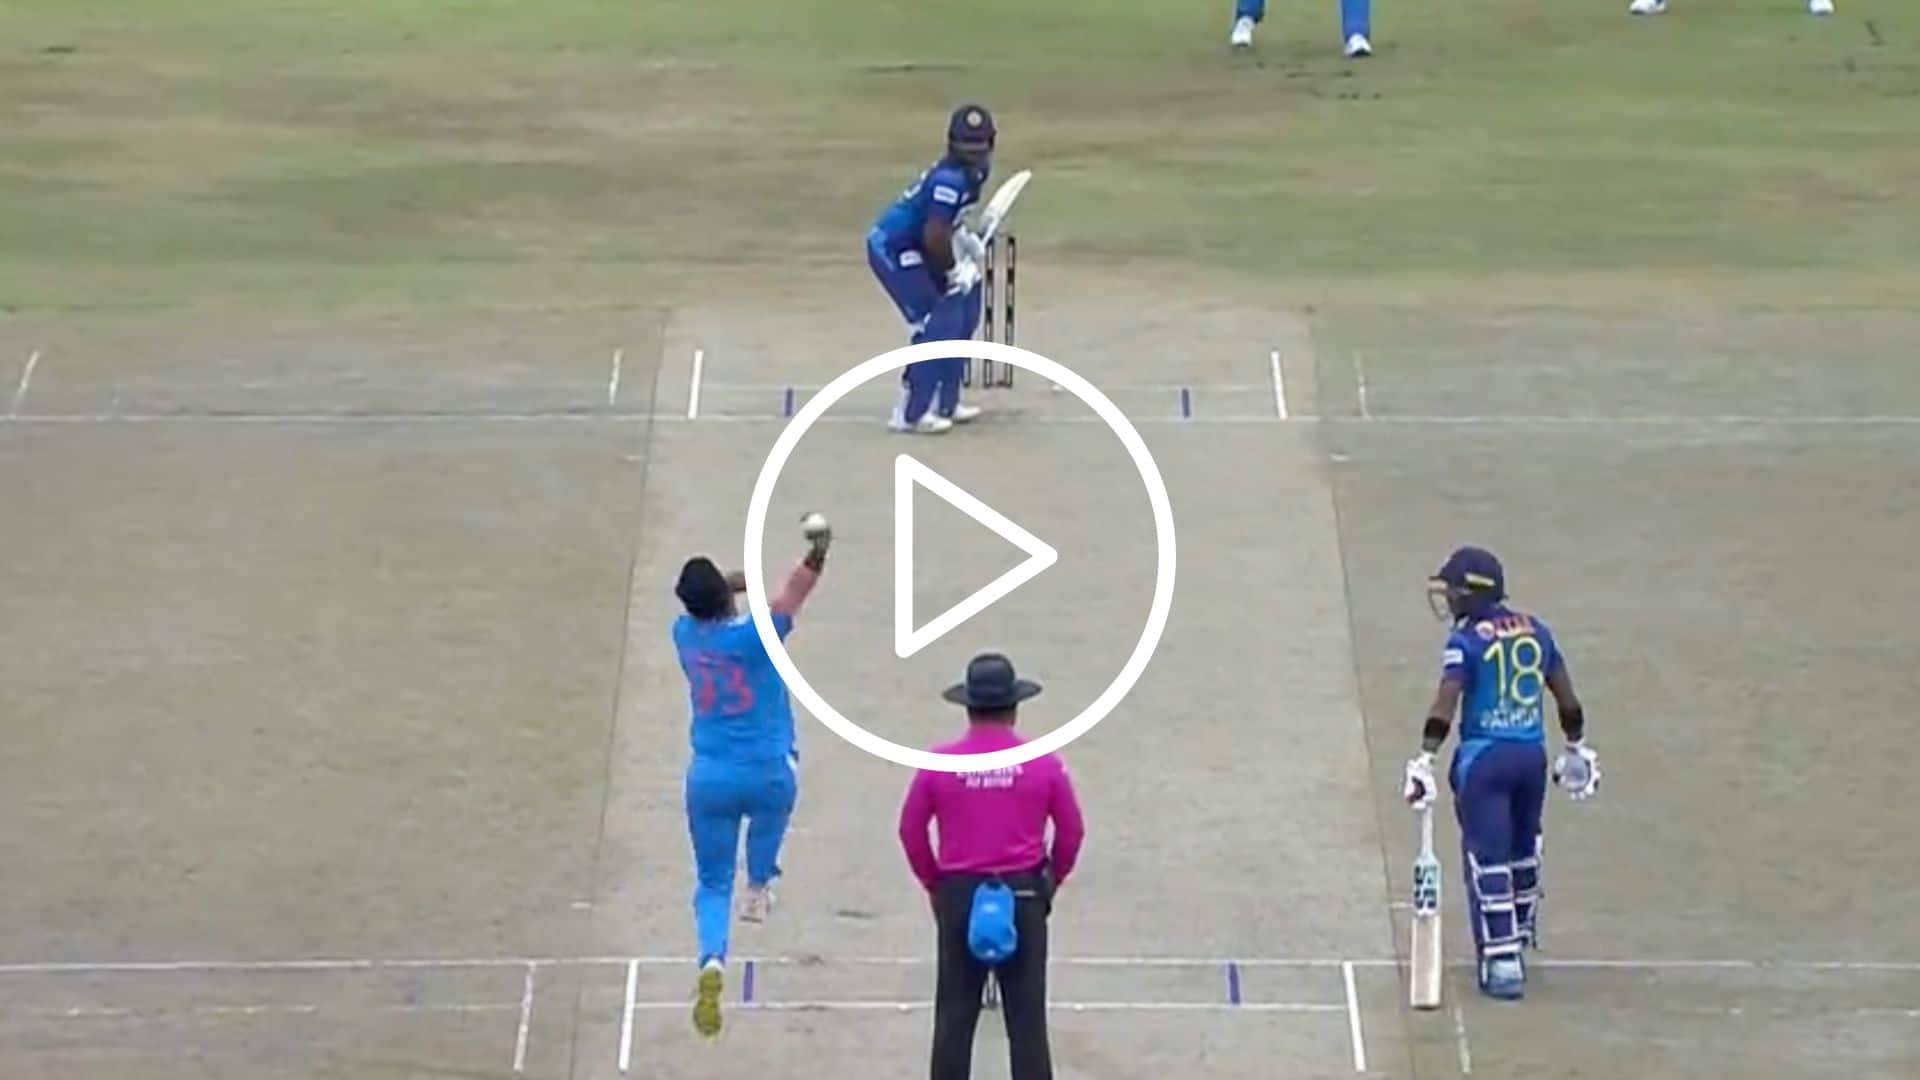 [Watch] Jasprit Bumrah's Unplayable Delivery Sends Kusal Perera Back For a 2-Ball Duck